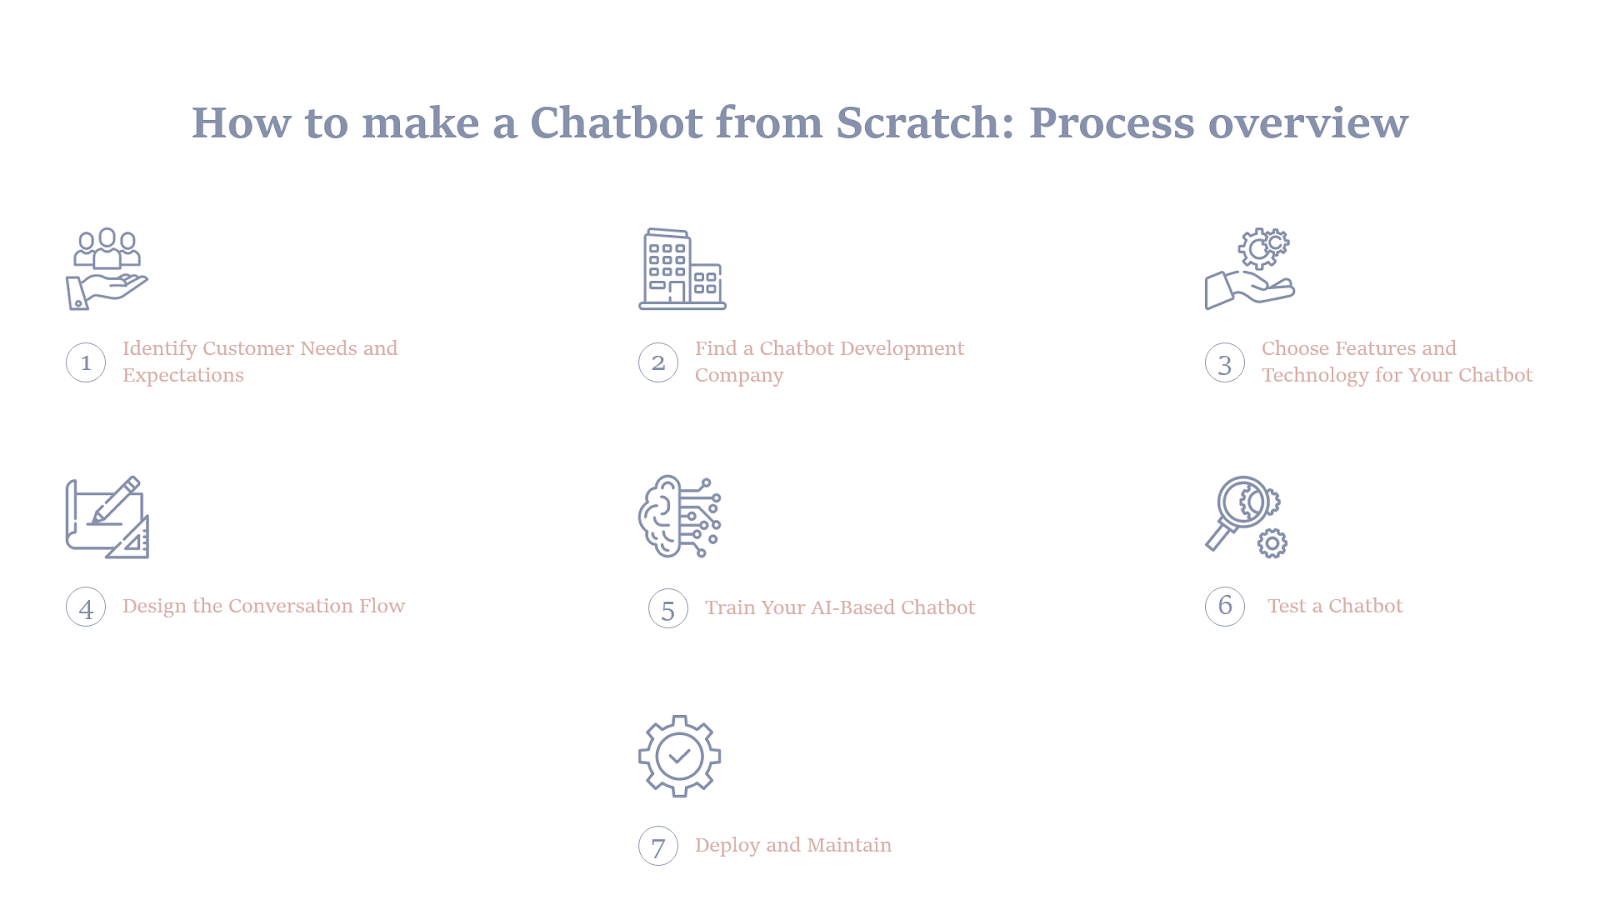 Building a Chatbot From Scratch